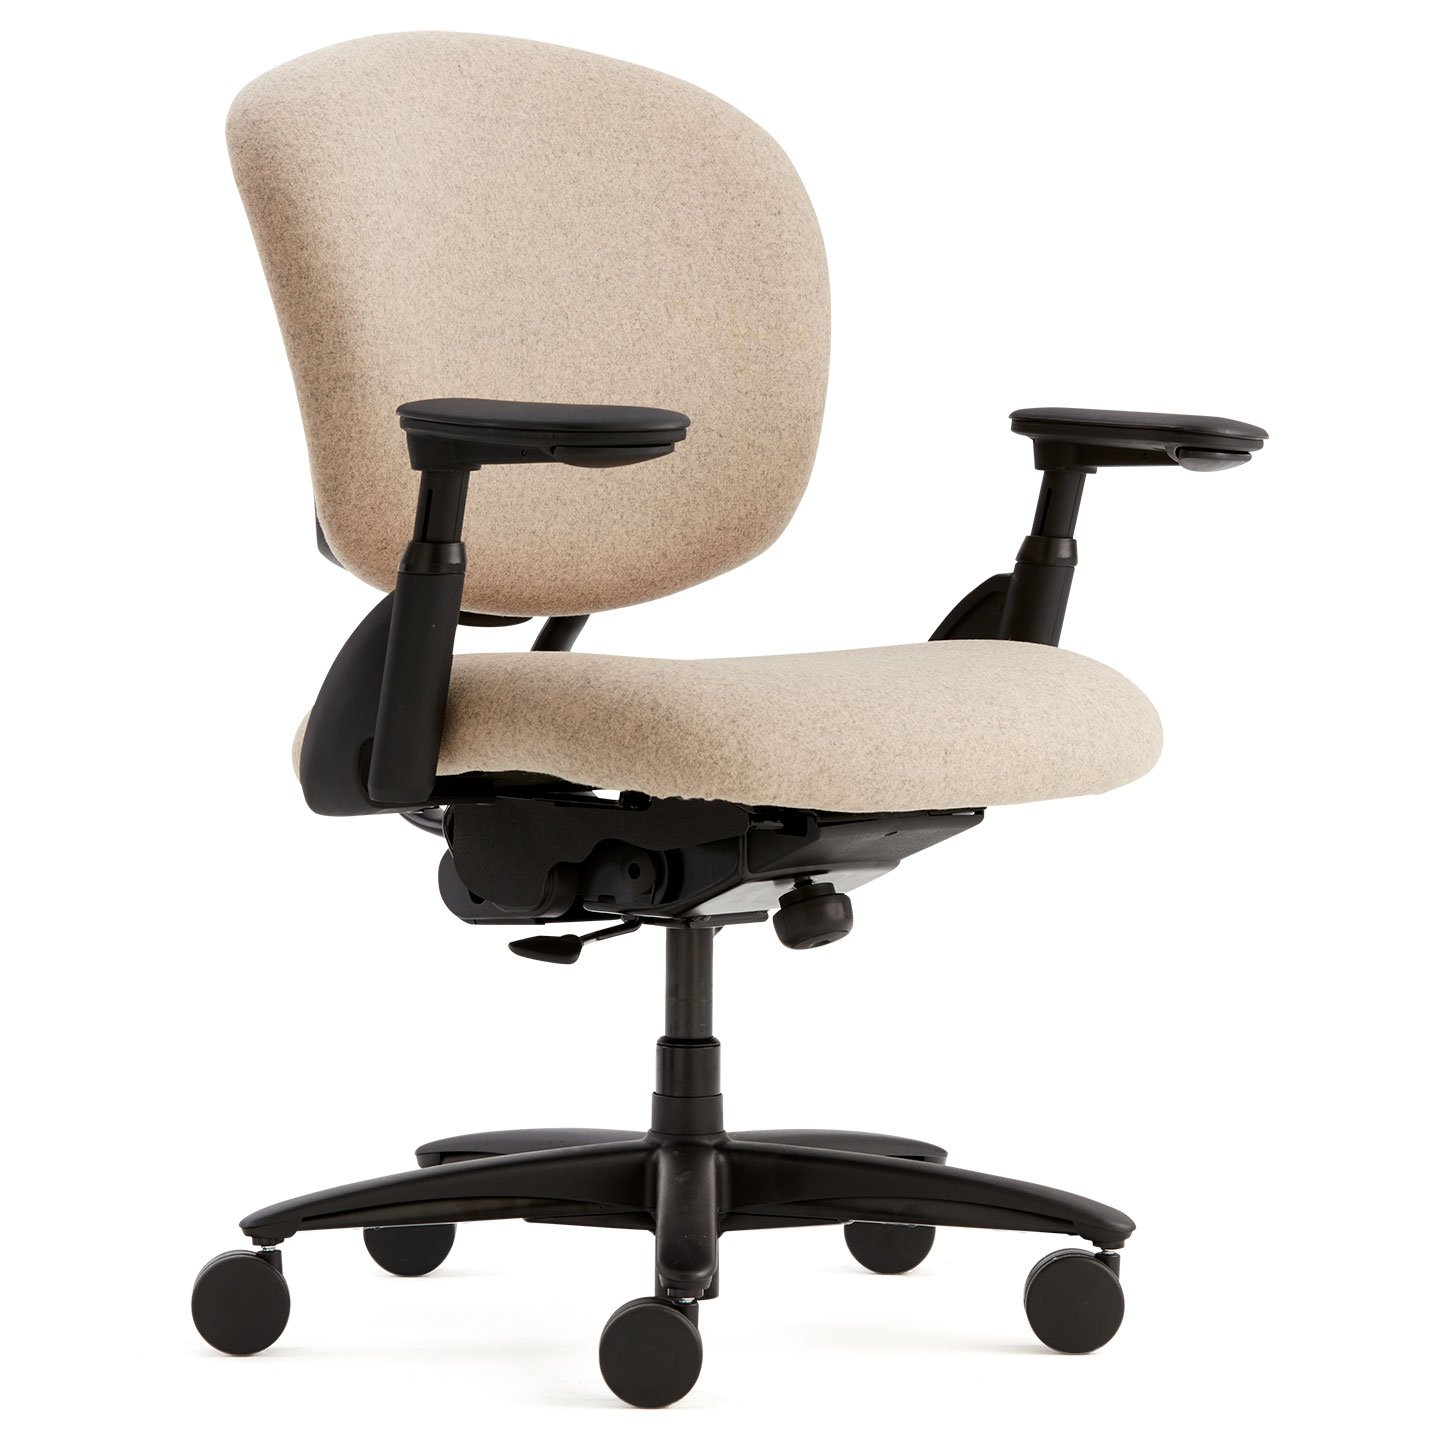 Haworth Improv XL desk chair in beige upholstery angularview